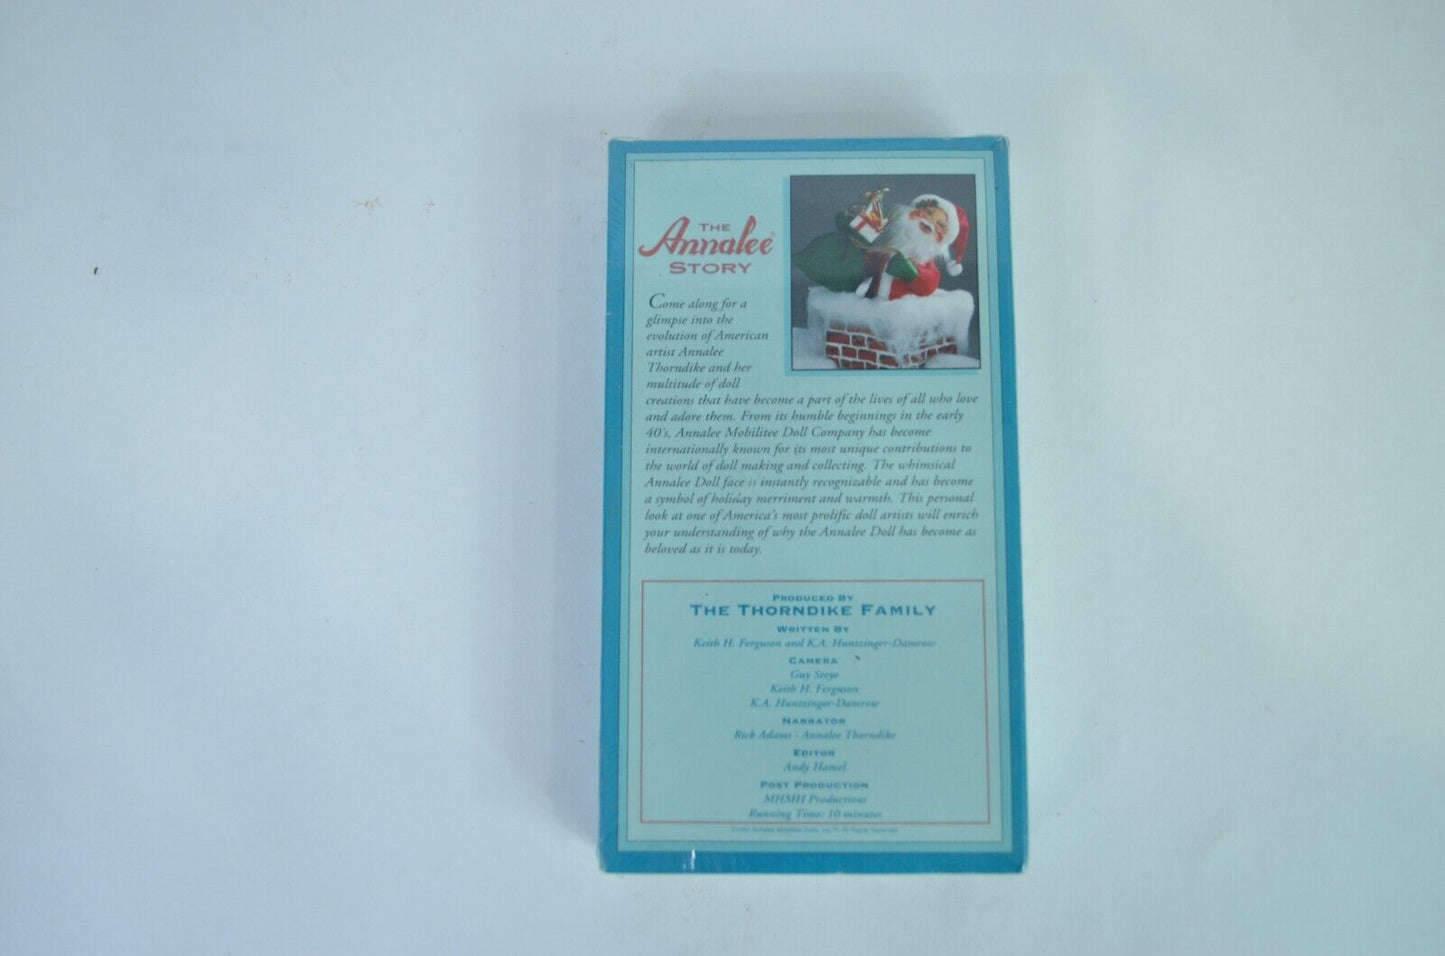 The Annalee Story: The Story of Annalee Thorndike & Her Dolls 1993 VHS Tape